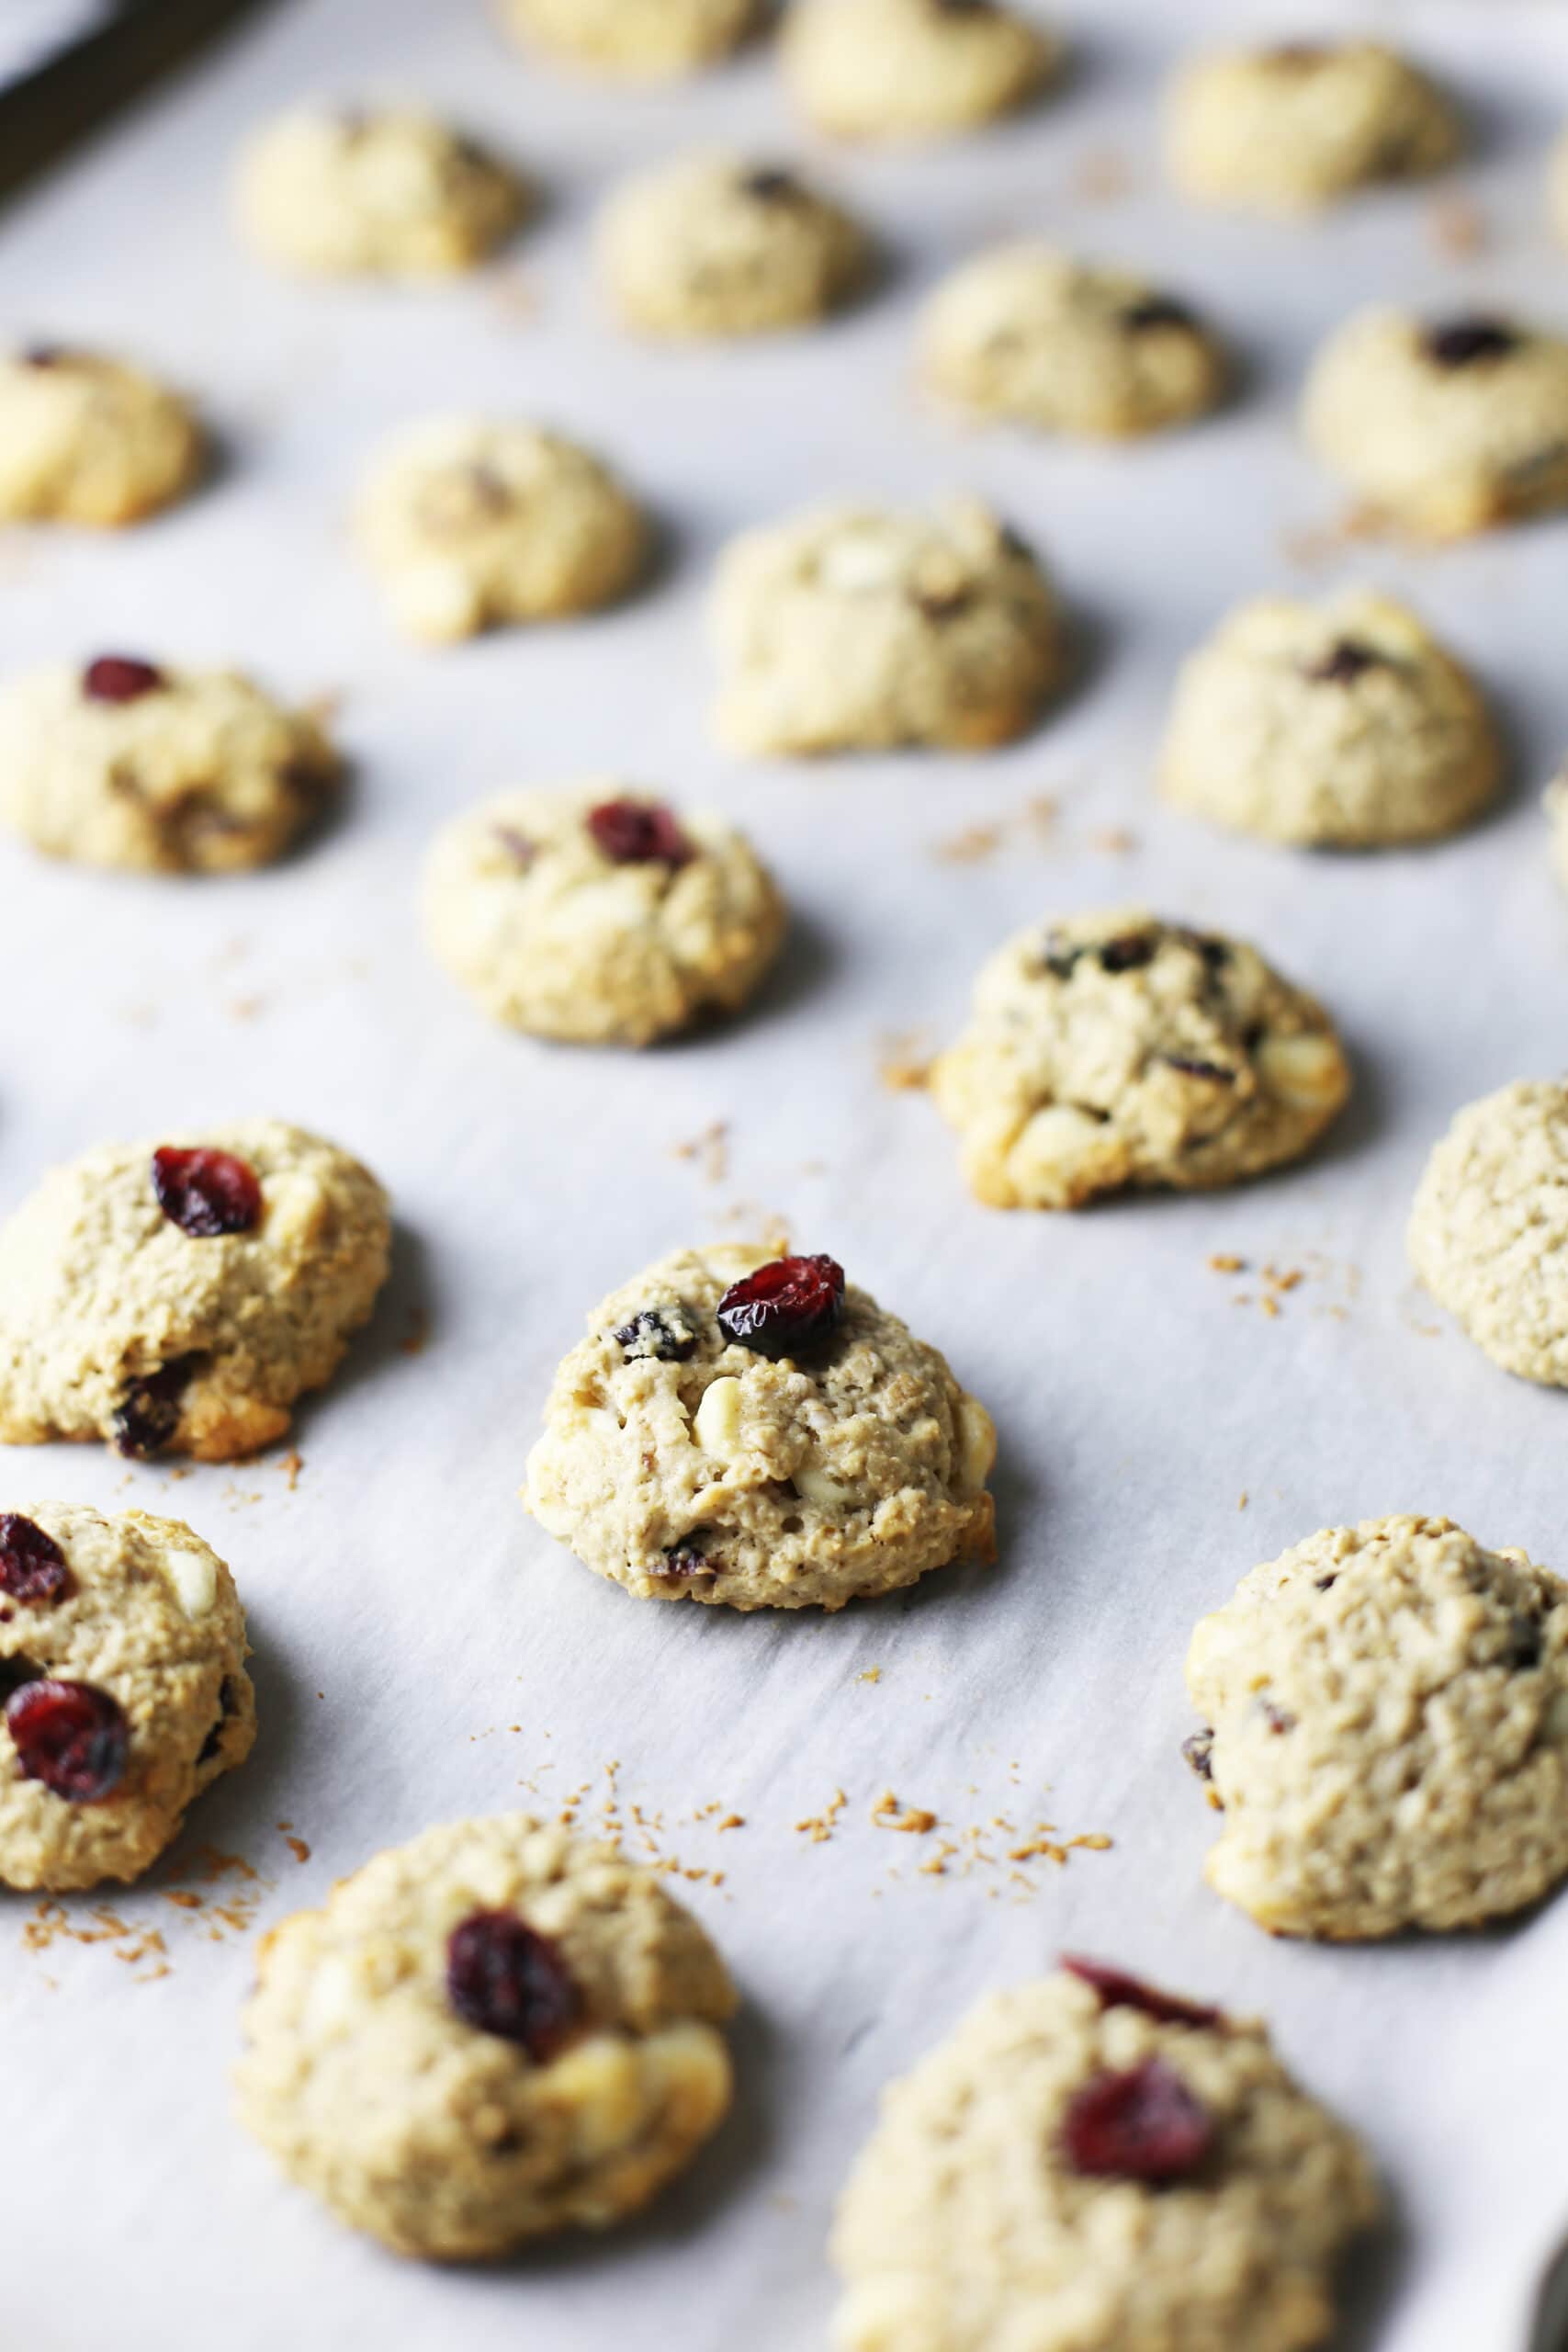 Baked white chocolate cranberry oatmeal cookies on parchment paper lined baking sheet.